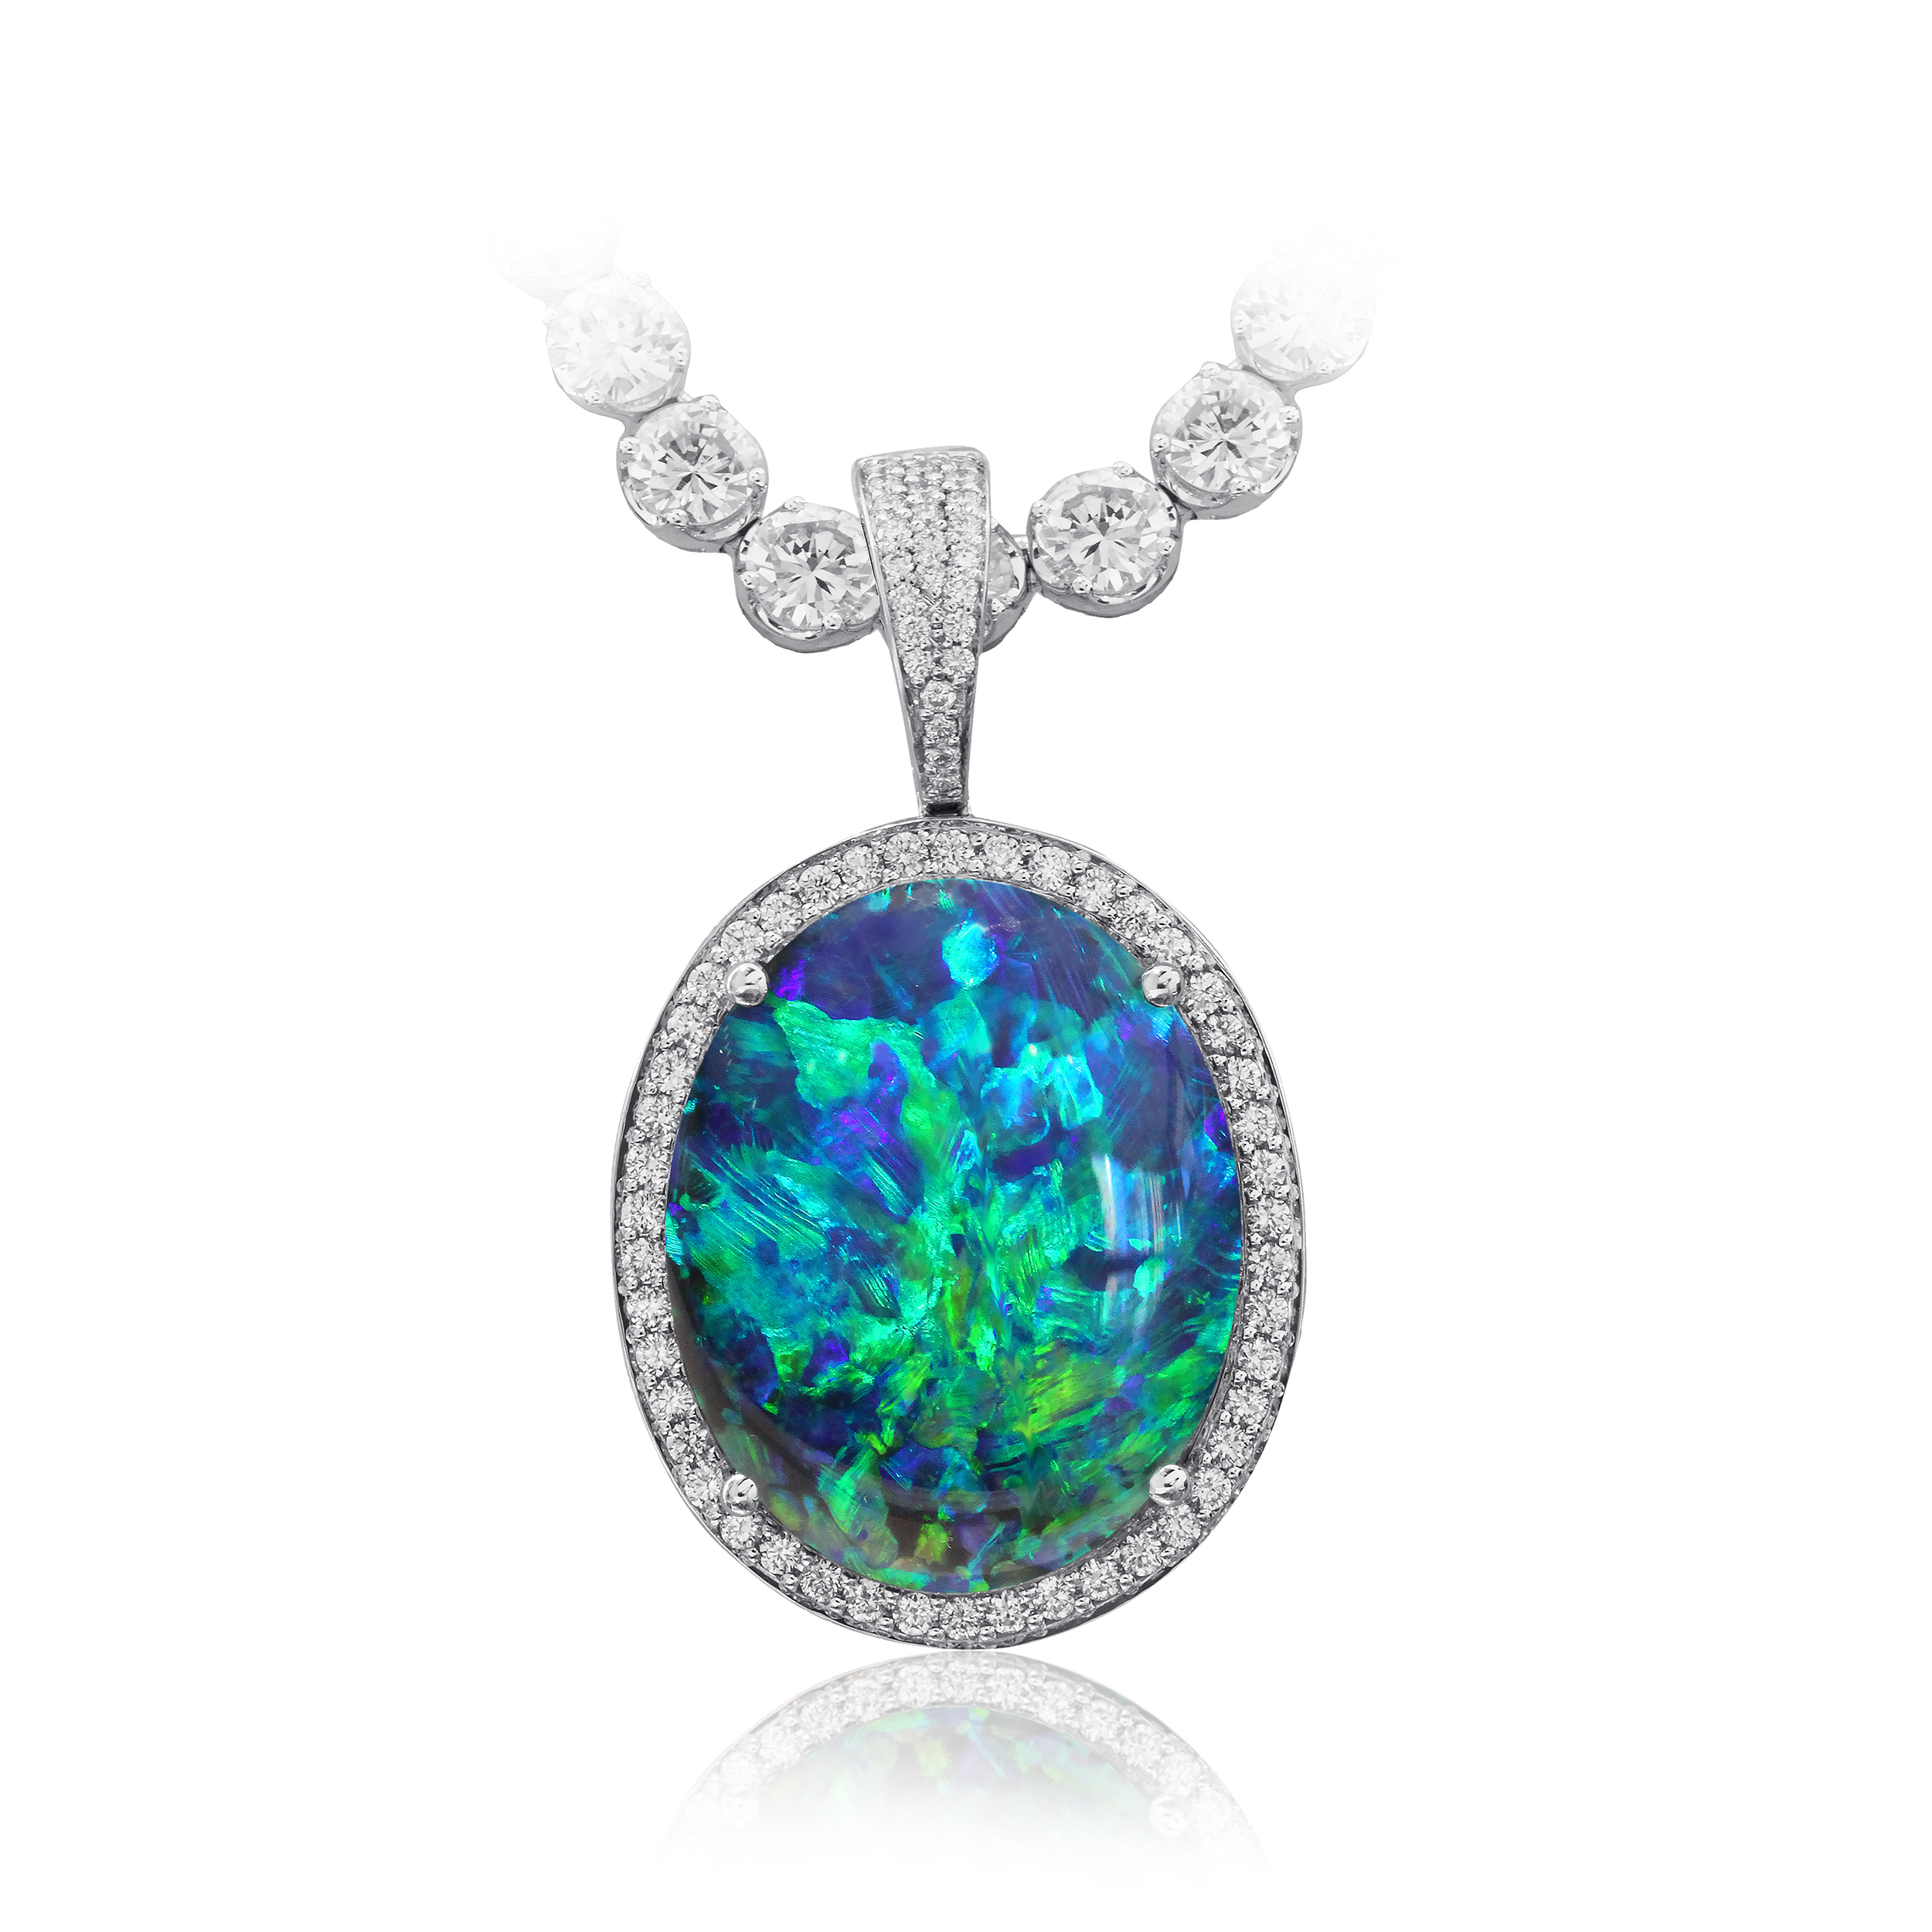 Gem Grade Black Opal Pendant set in 18k with Diamonds featuring Flashes ...